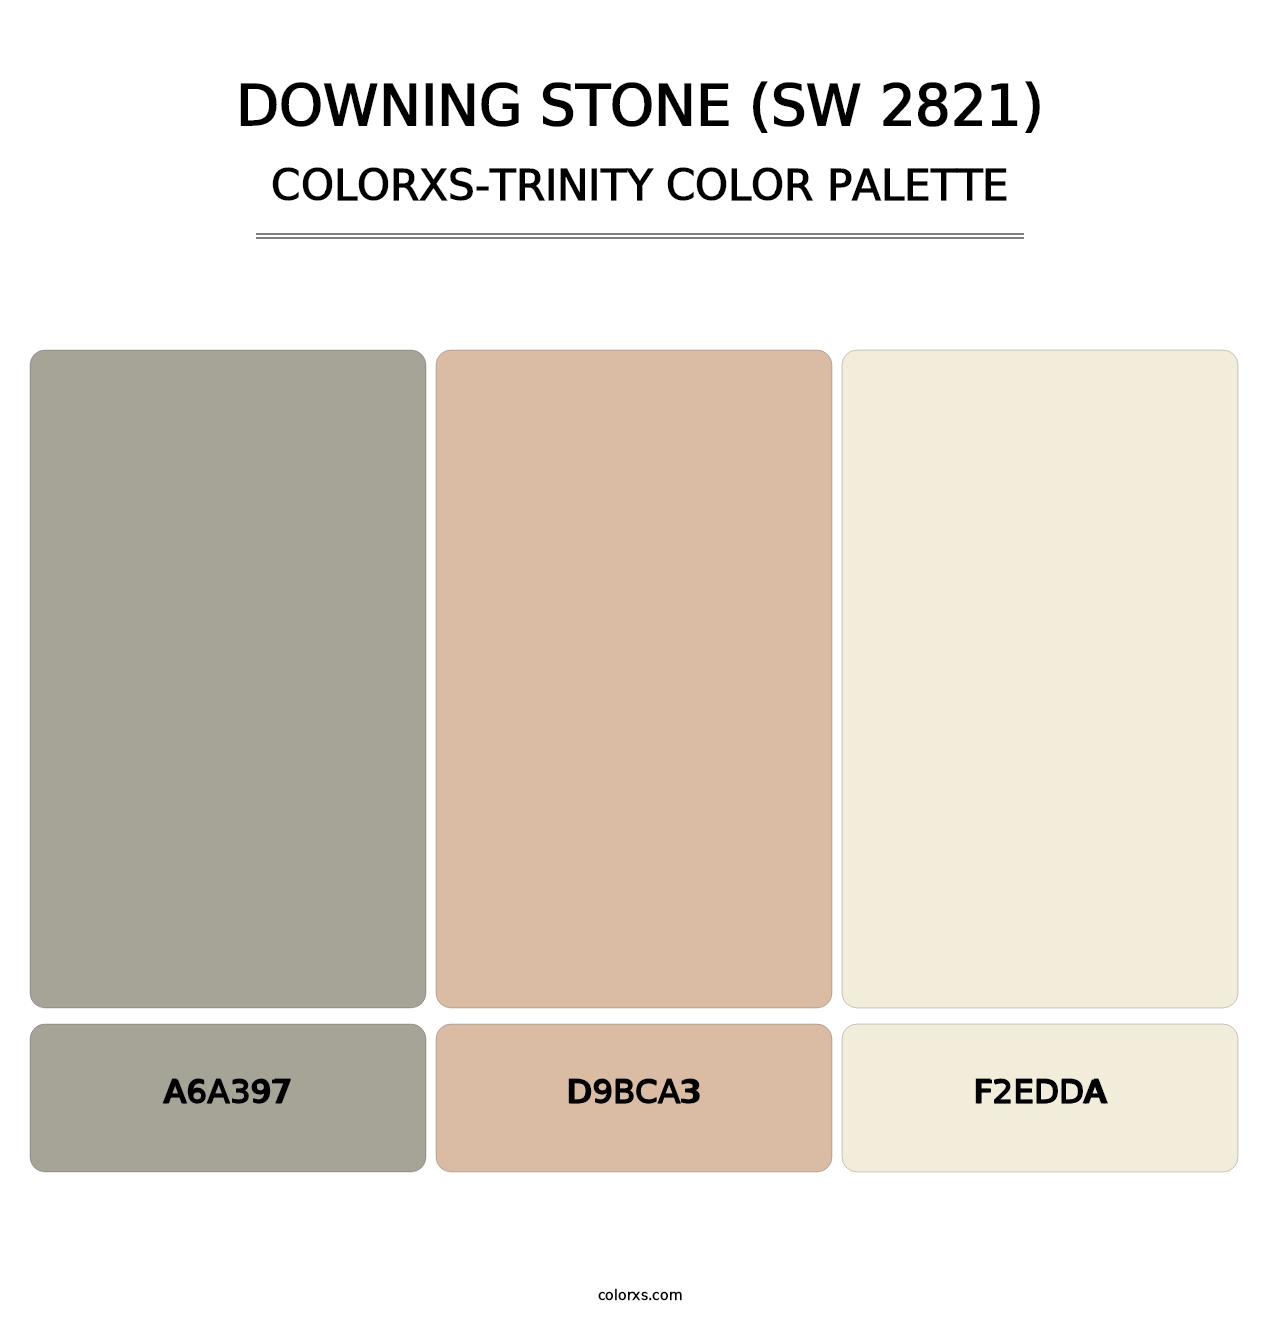 Downing Stone (SW 2821) - Colorxs Trinity Palette